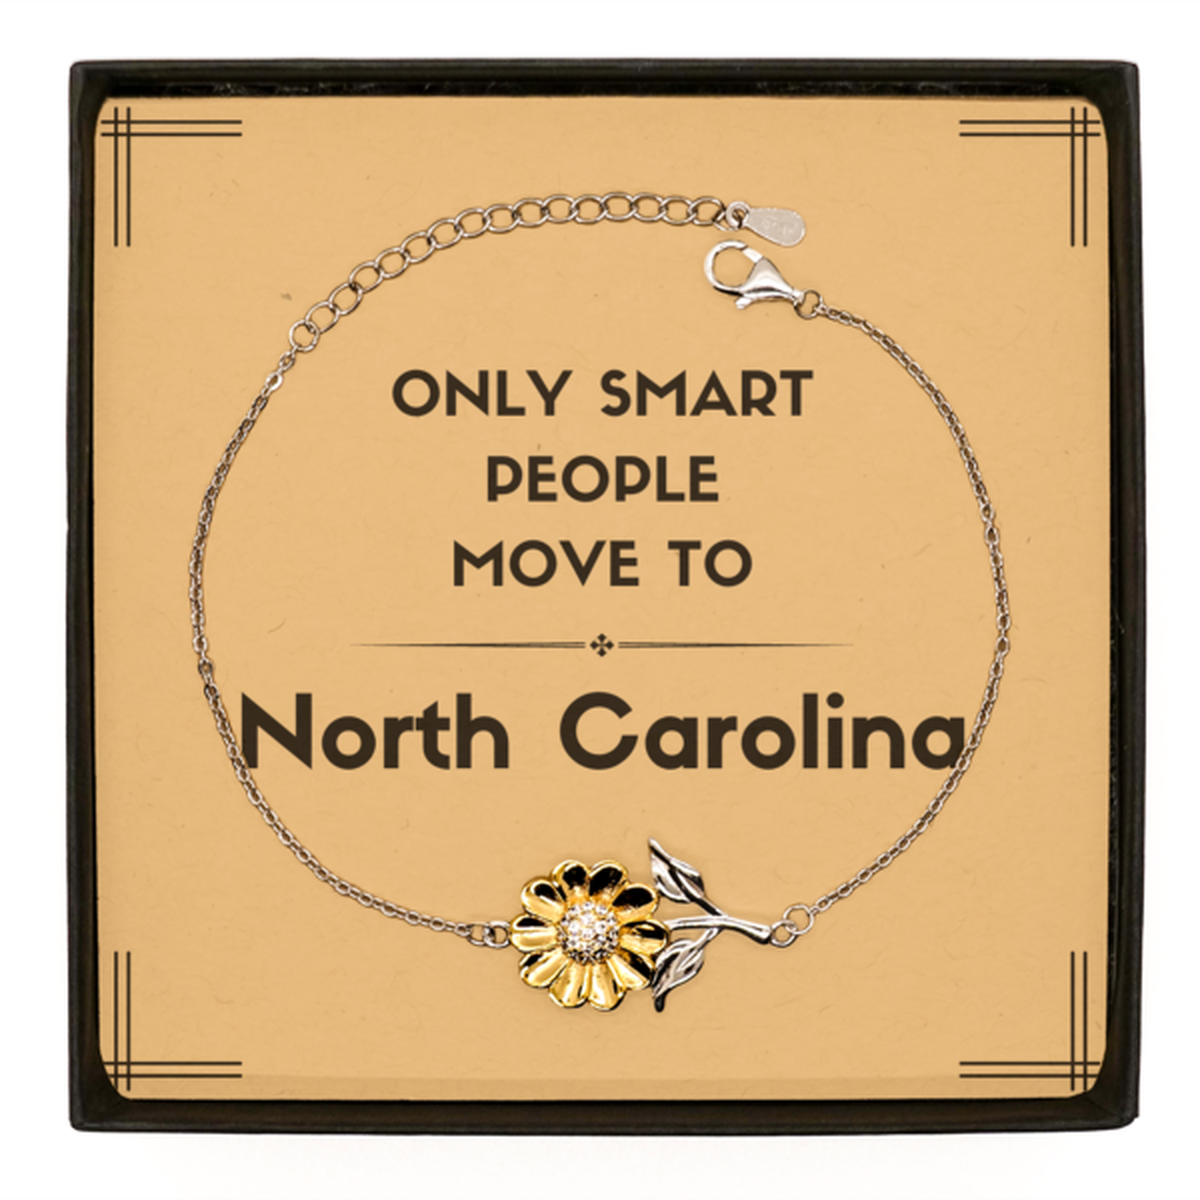 Only smart people move to North Carolina Sunflower Bracelet, Message Card Gifts For North Carolina, Move to North Carolina Gifts for Friends Coworker Funny Saying Quote